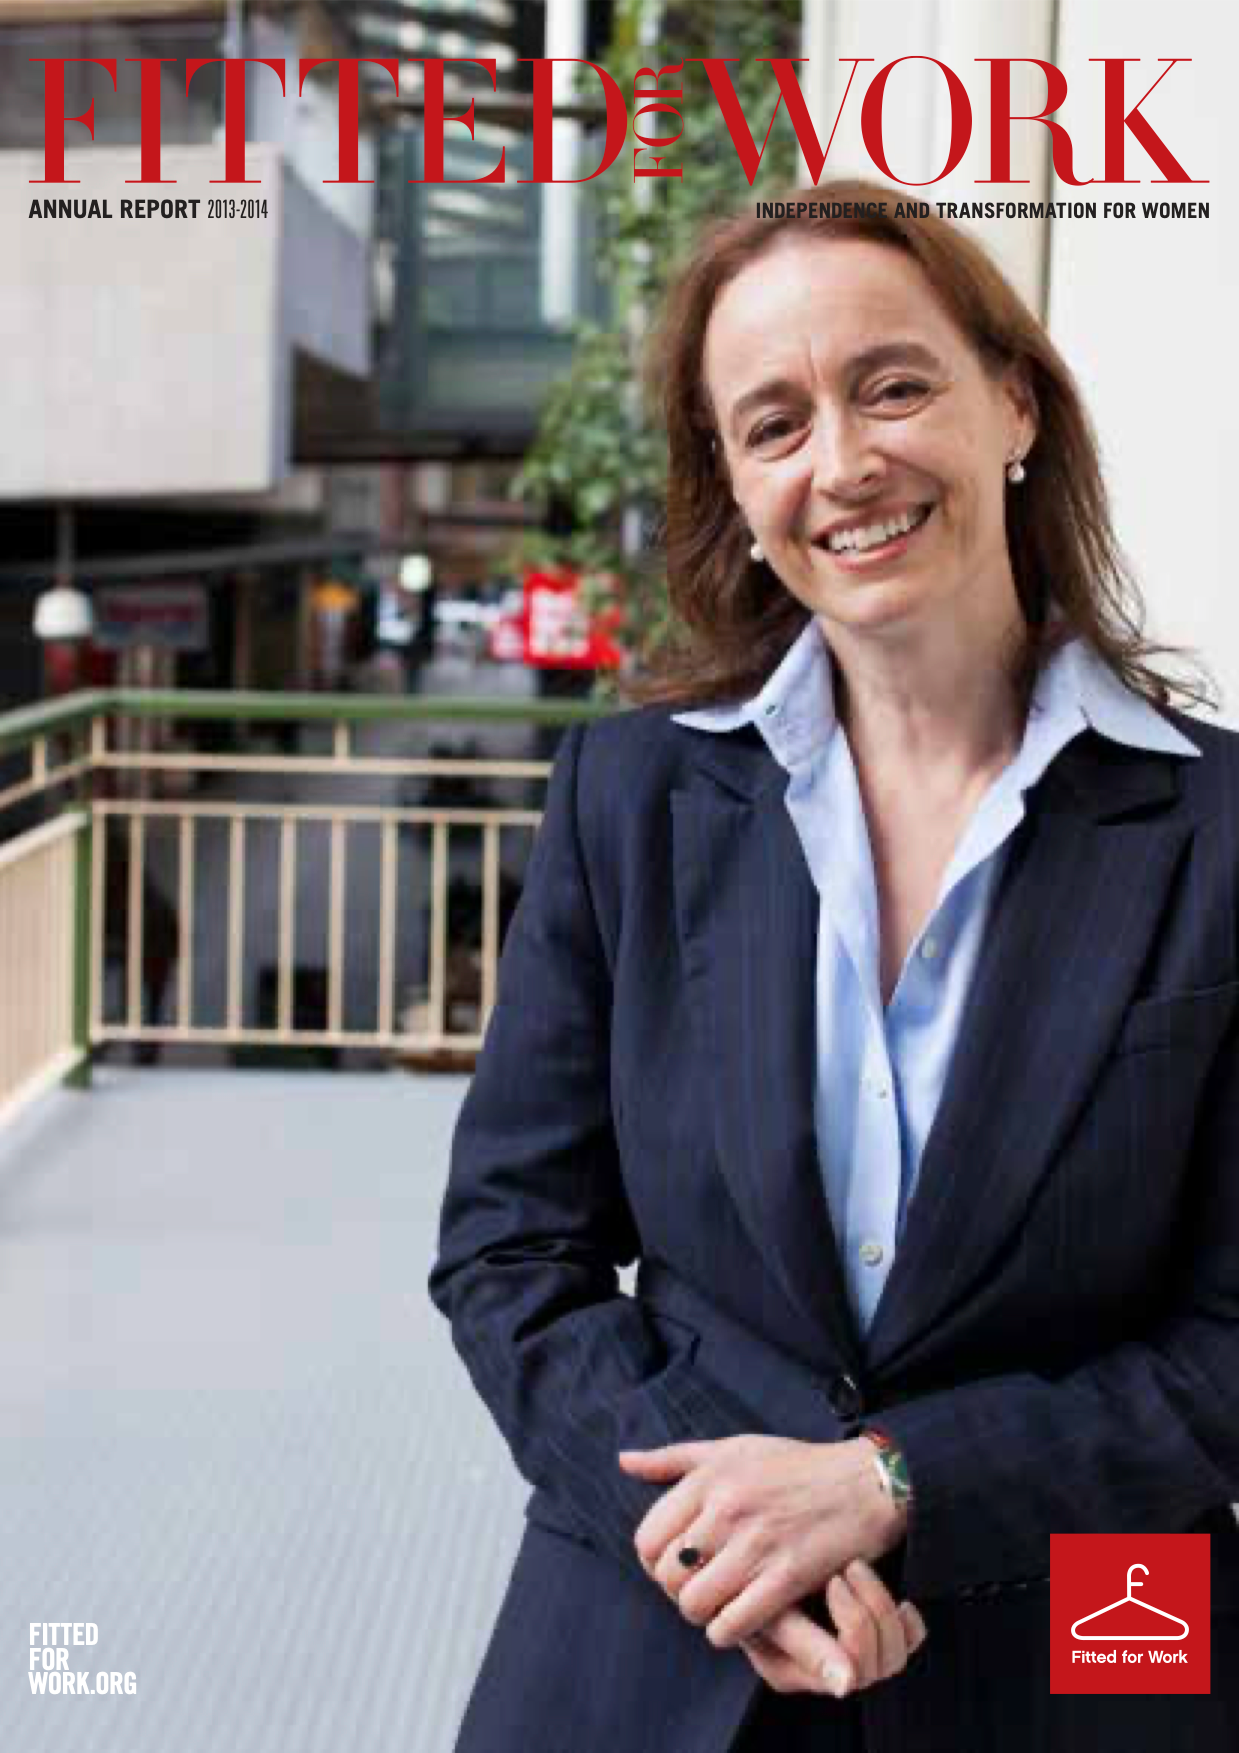 A smiling women standing in a relaxed position on the balcony outside Fitted for Work's office. She is wearing professional clothing